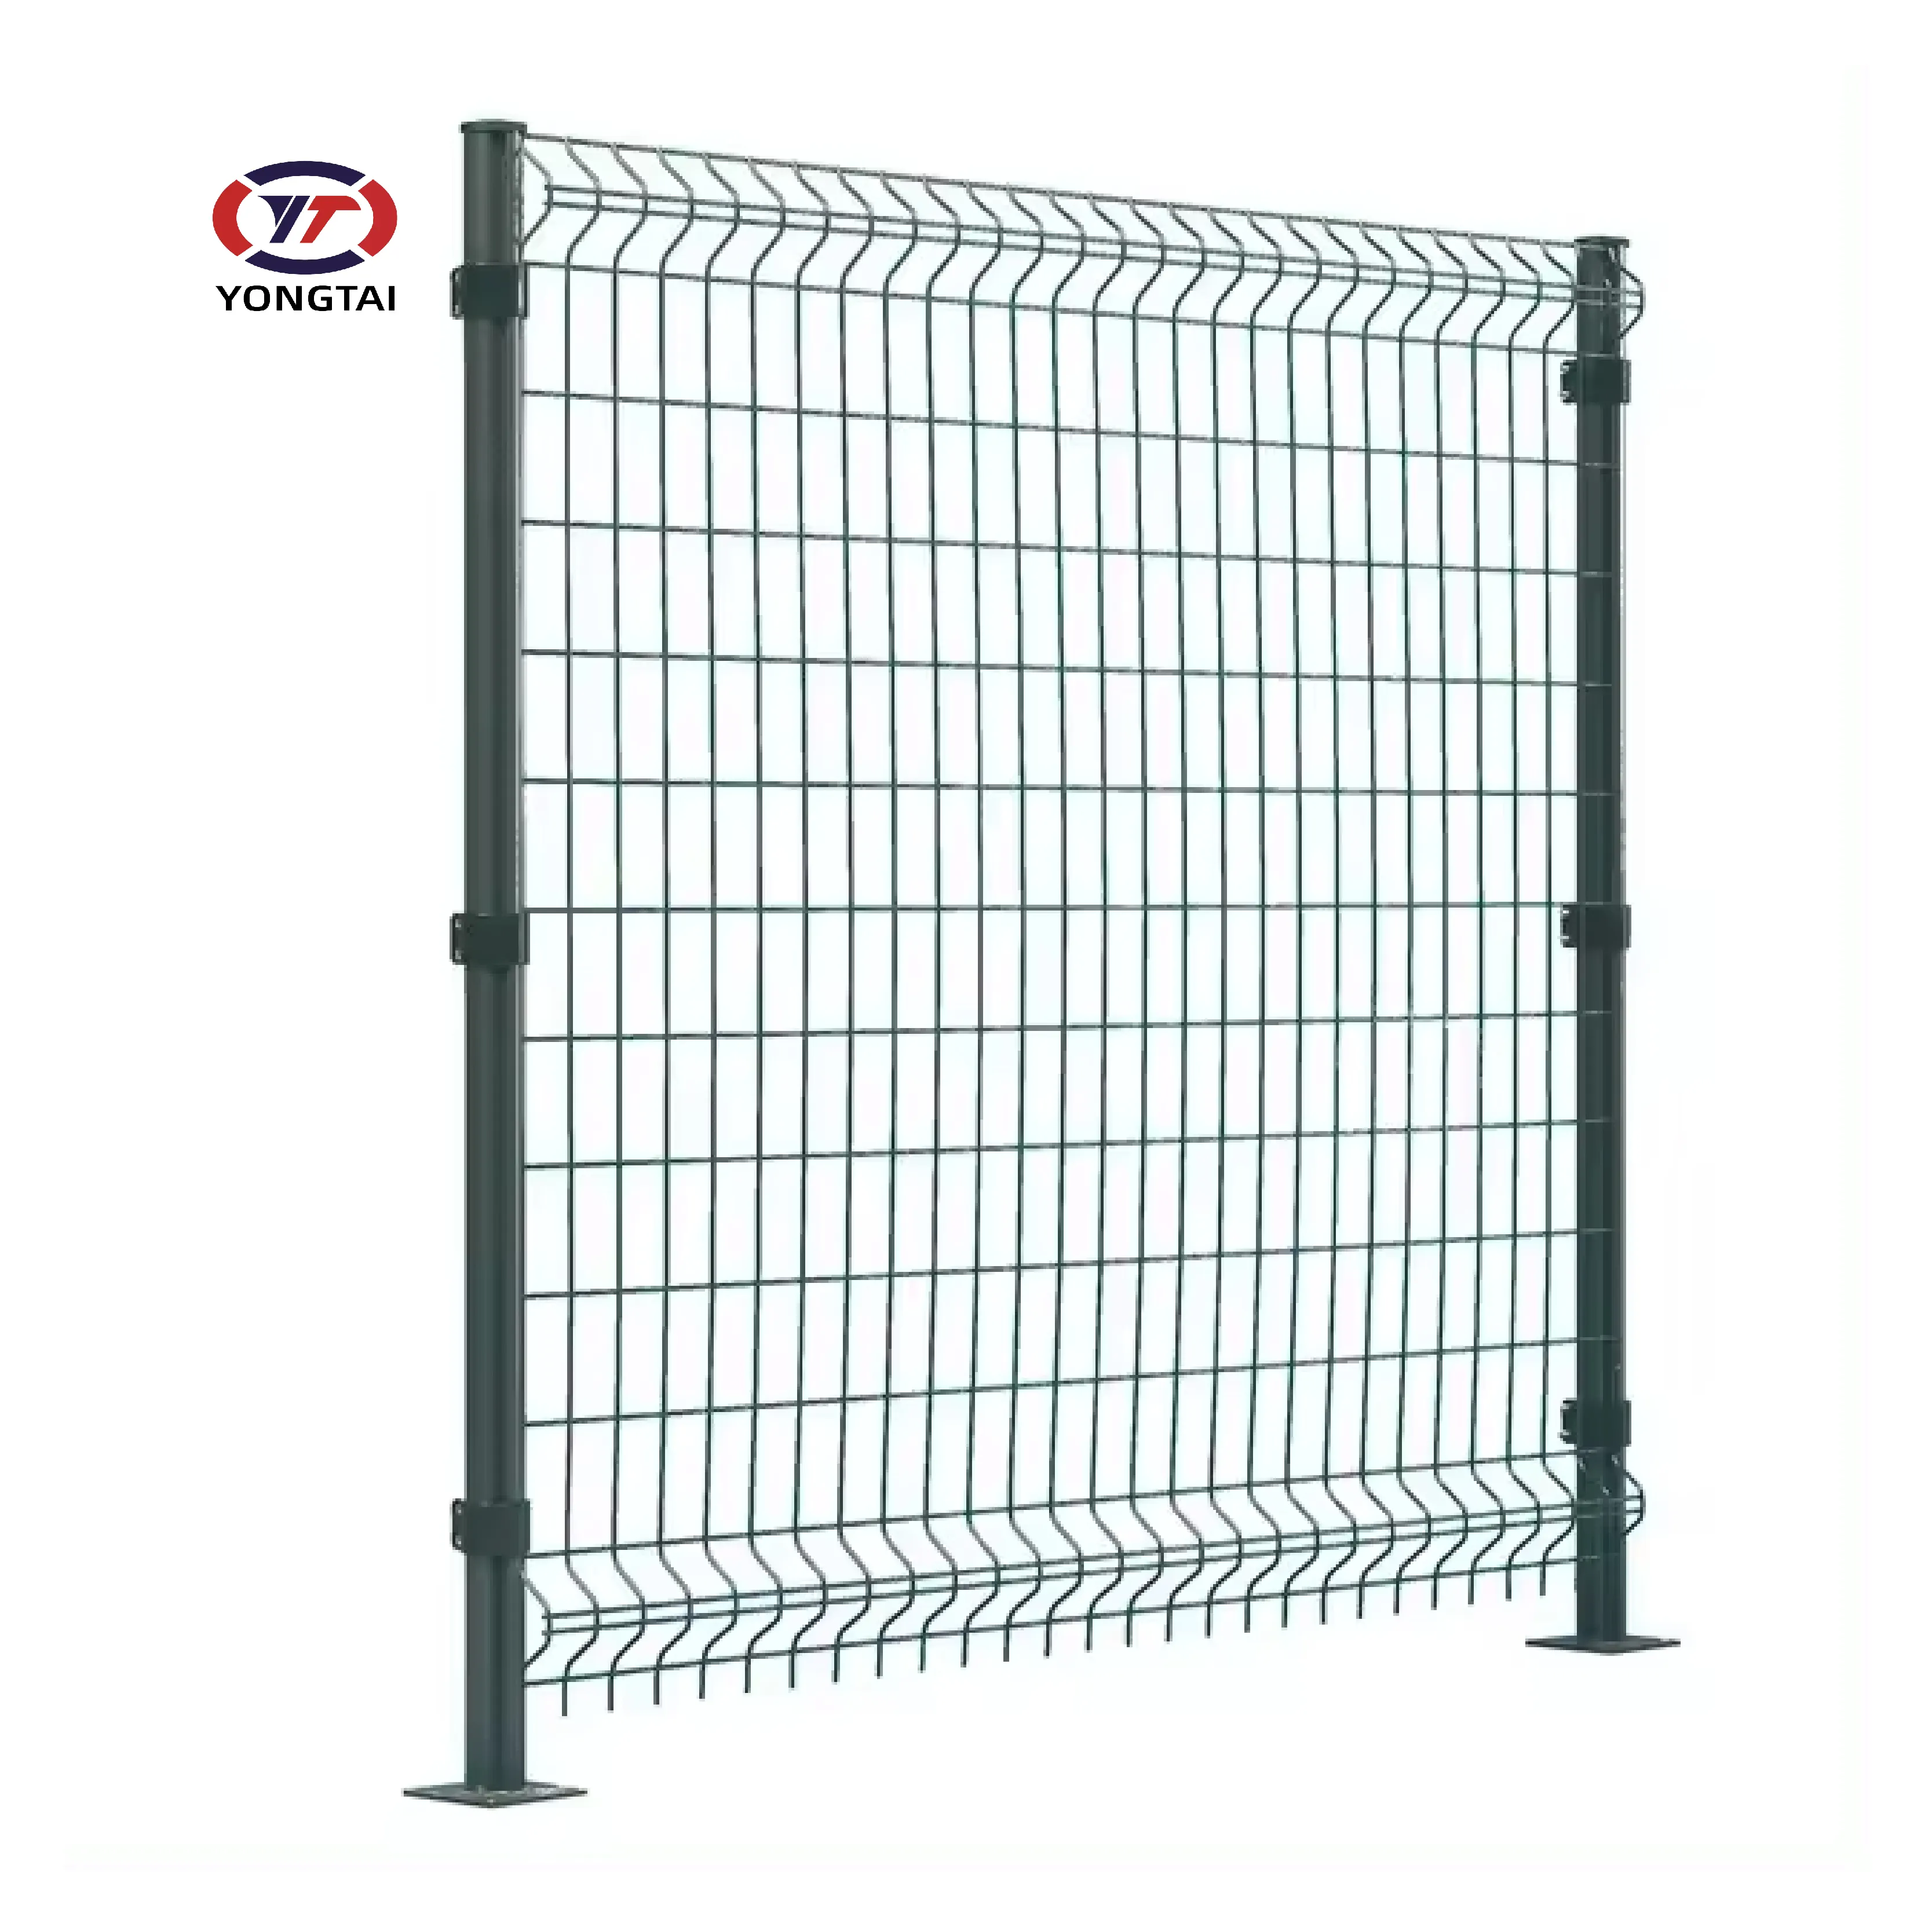 3D Fence Panel welded wire grid fence panels rigid mesh fence